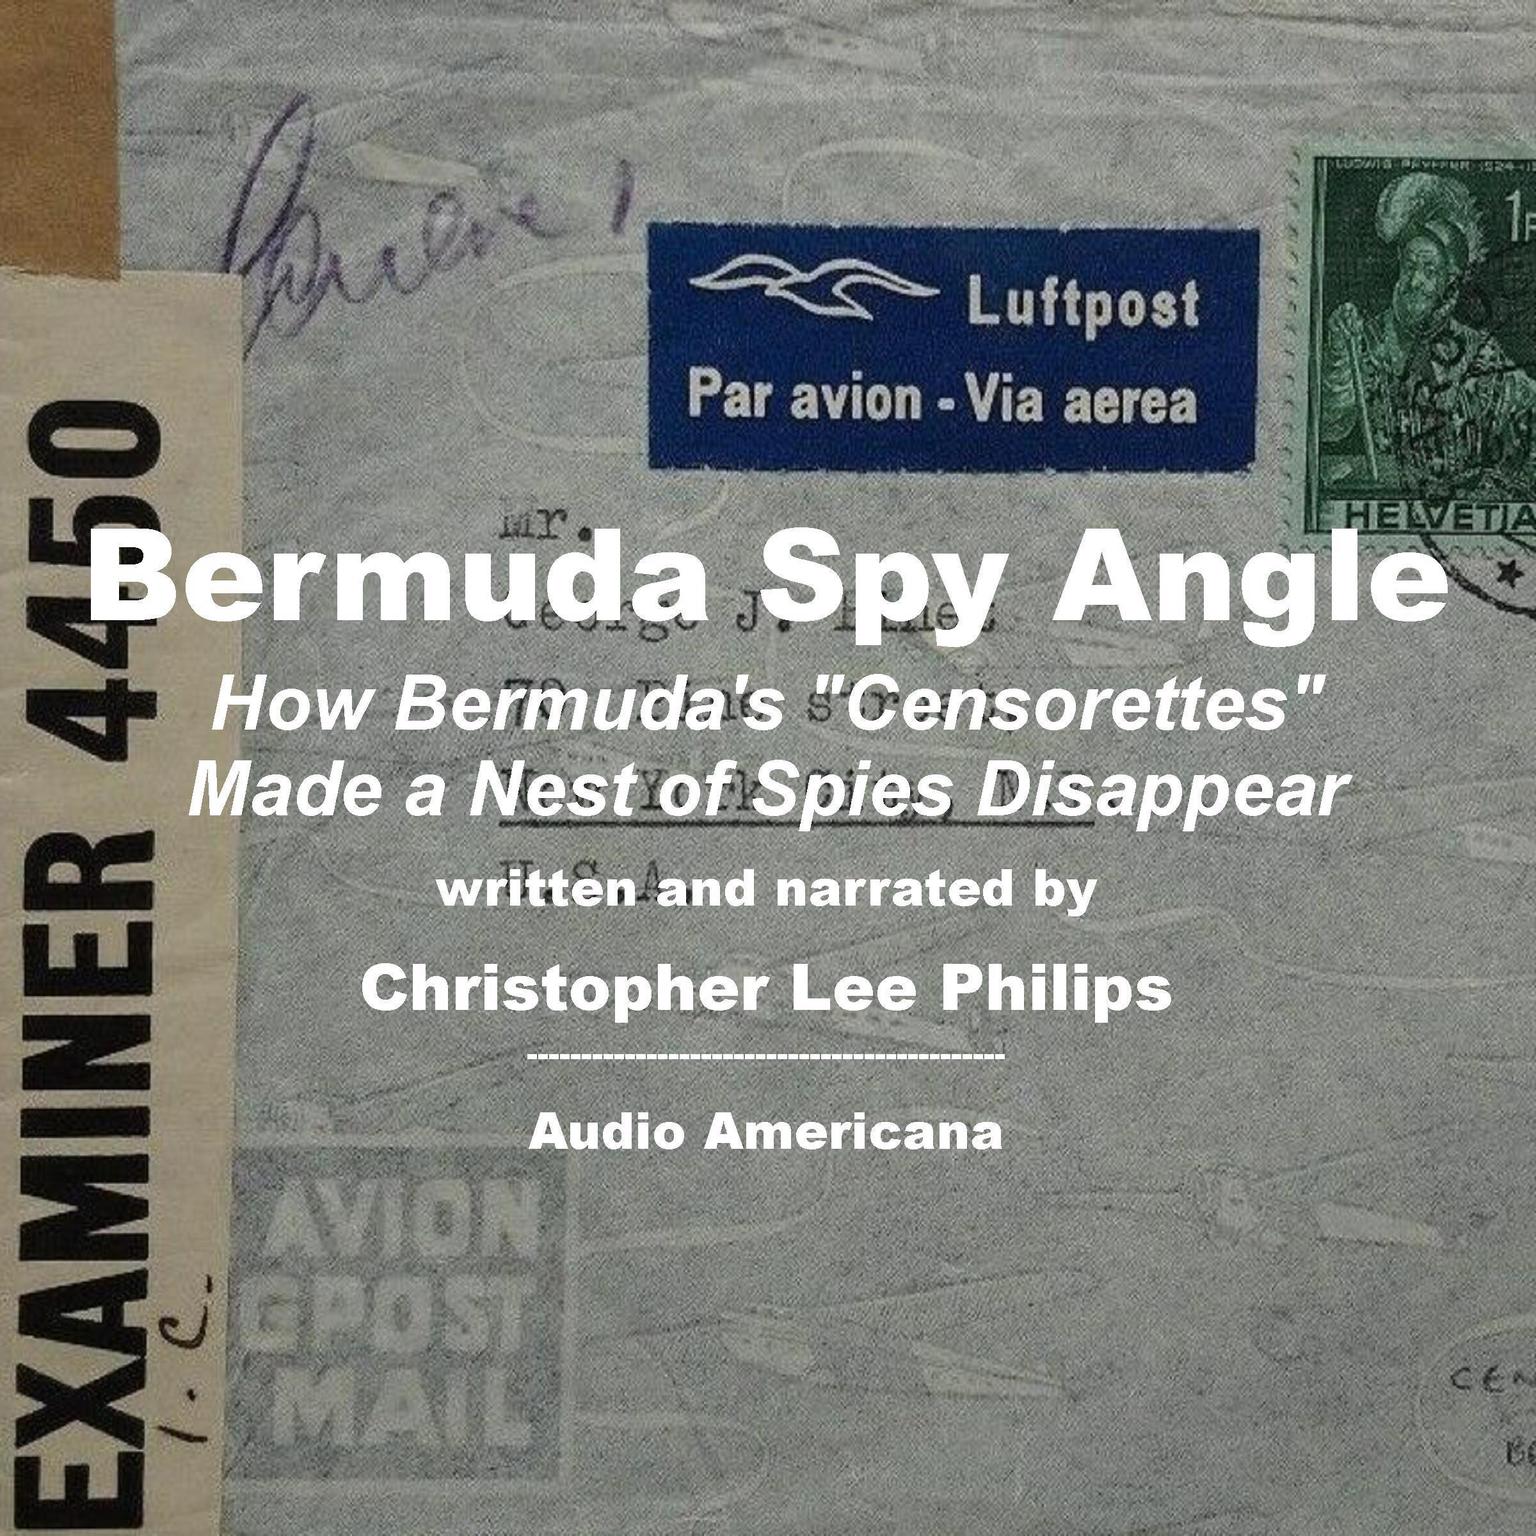 Bermuda Spy Angle: How Bermuda’s “Censorettes” Made a Nest of Spies Disappear Audiobook, by Christopher Lee Philips